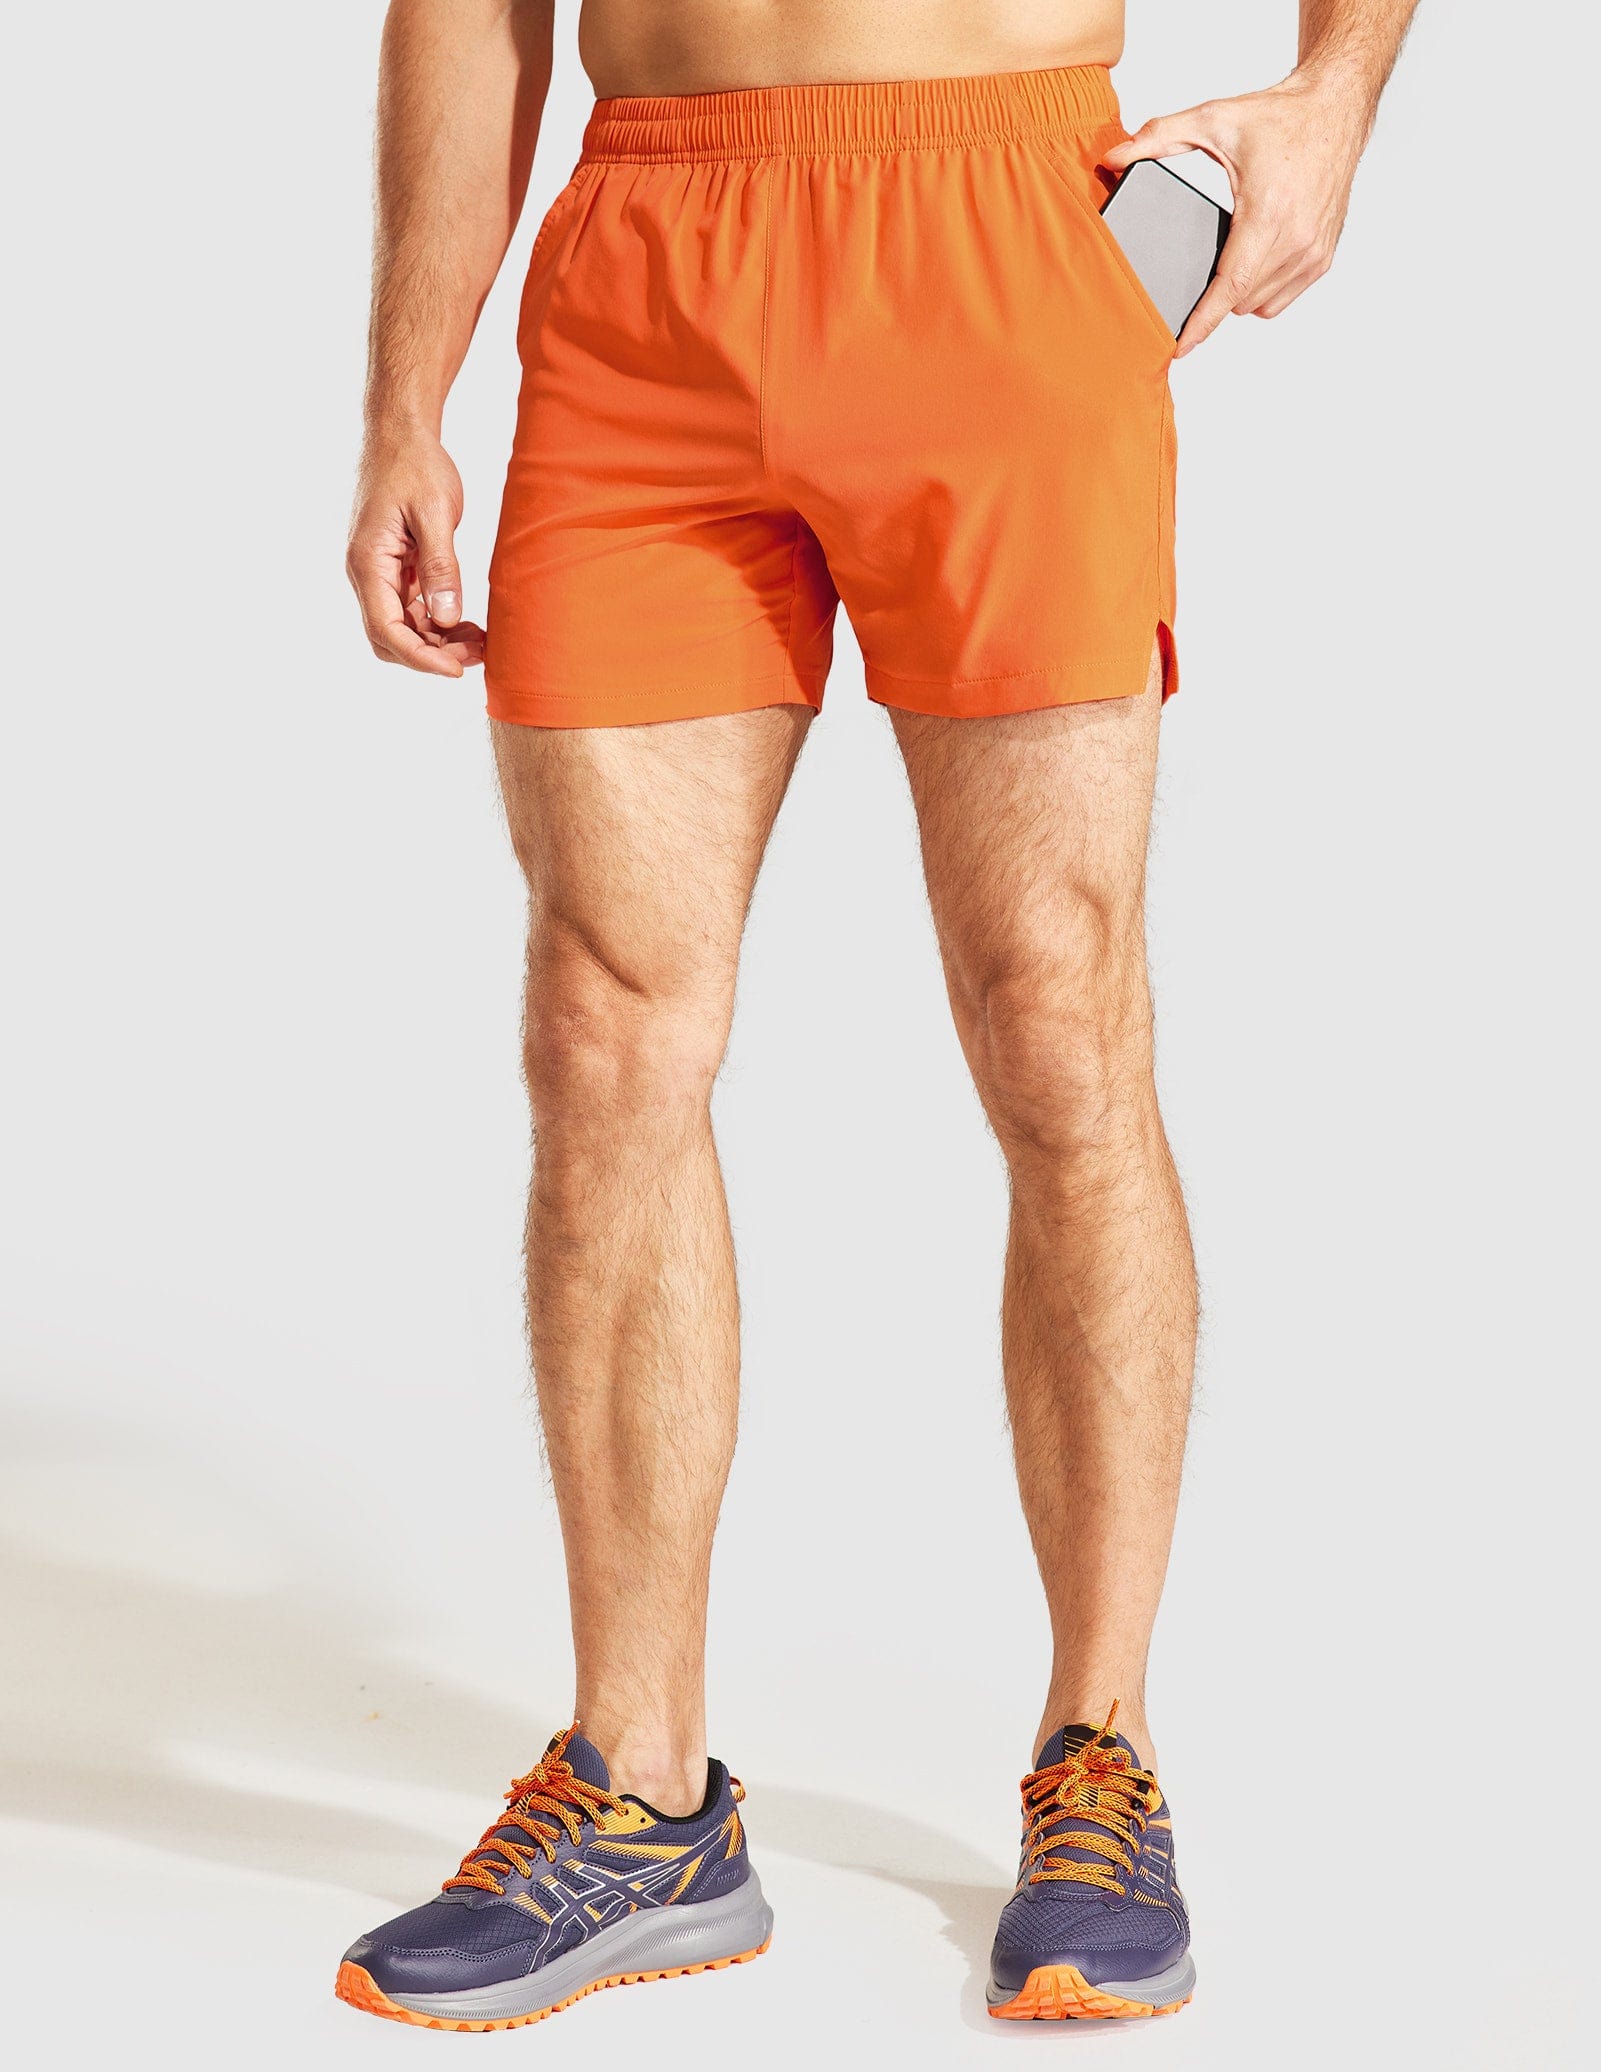 Men's Workout Shorts 5 Inches Running Shorts with Pockets Men's Shorts MIER